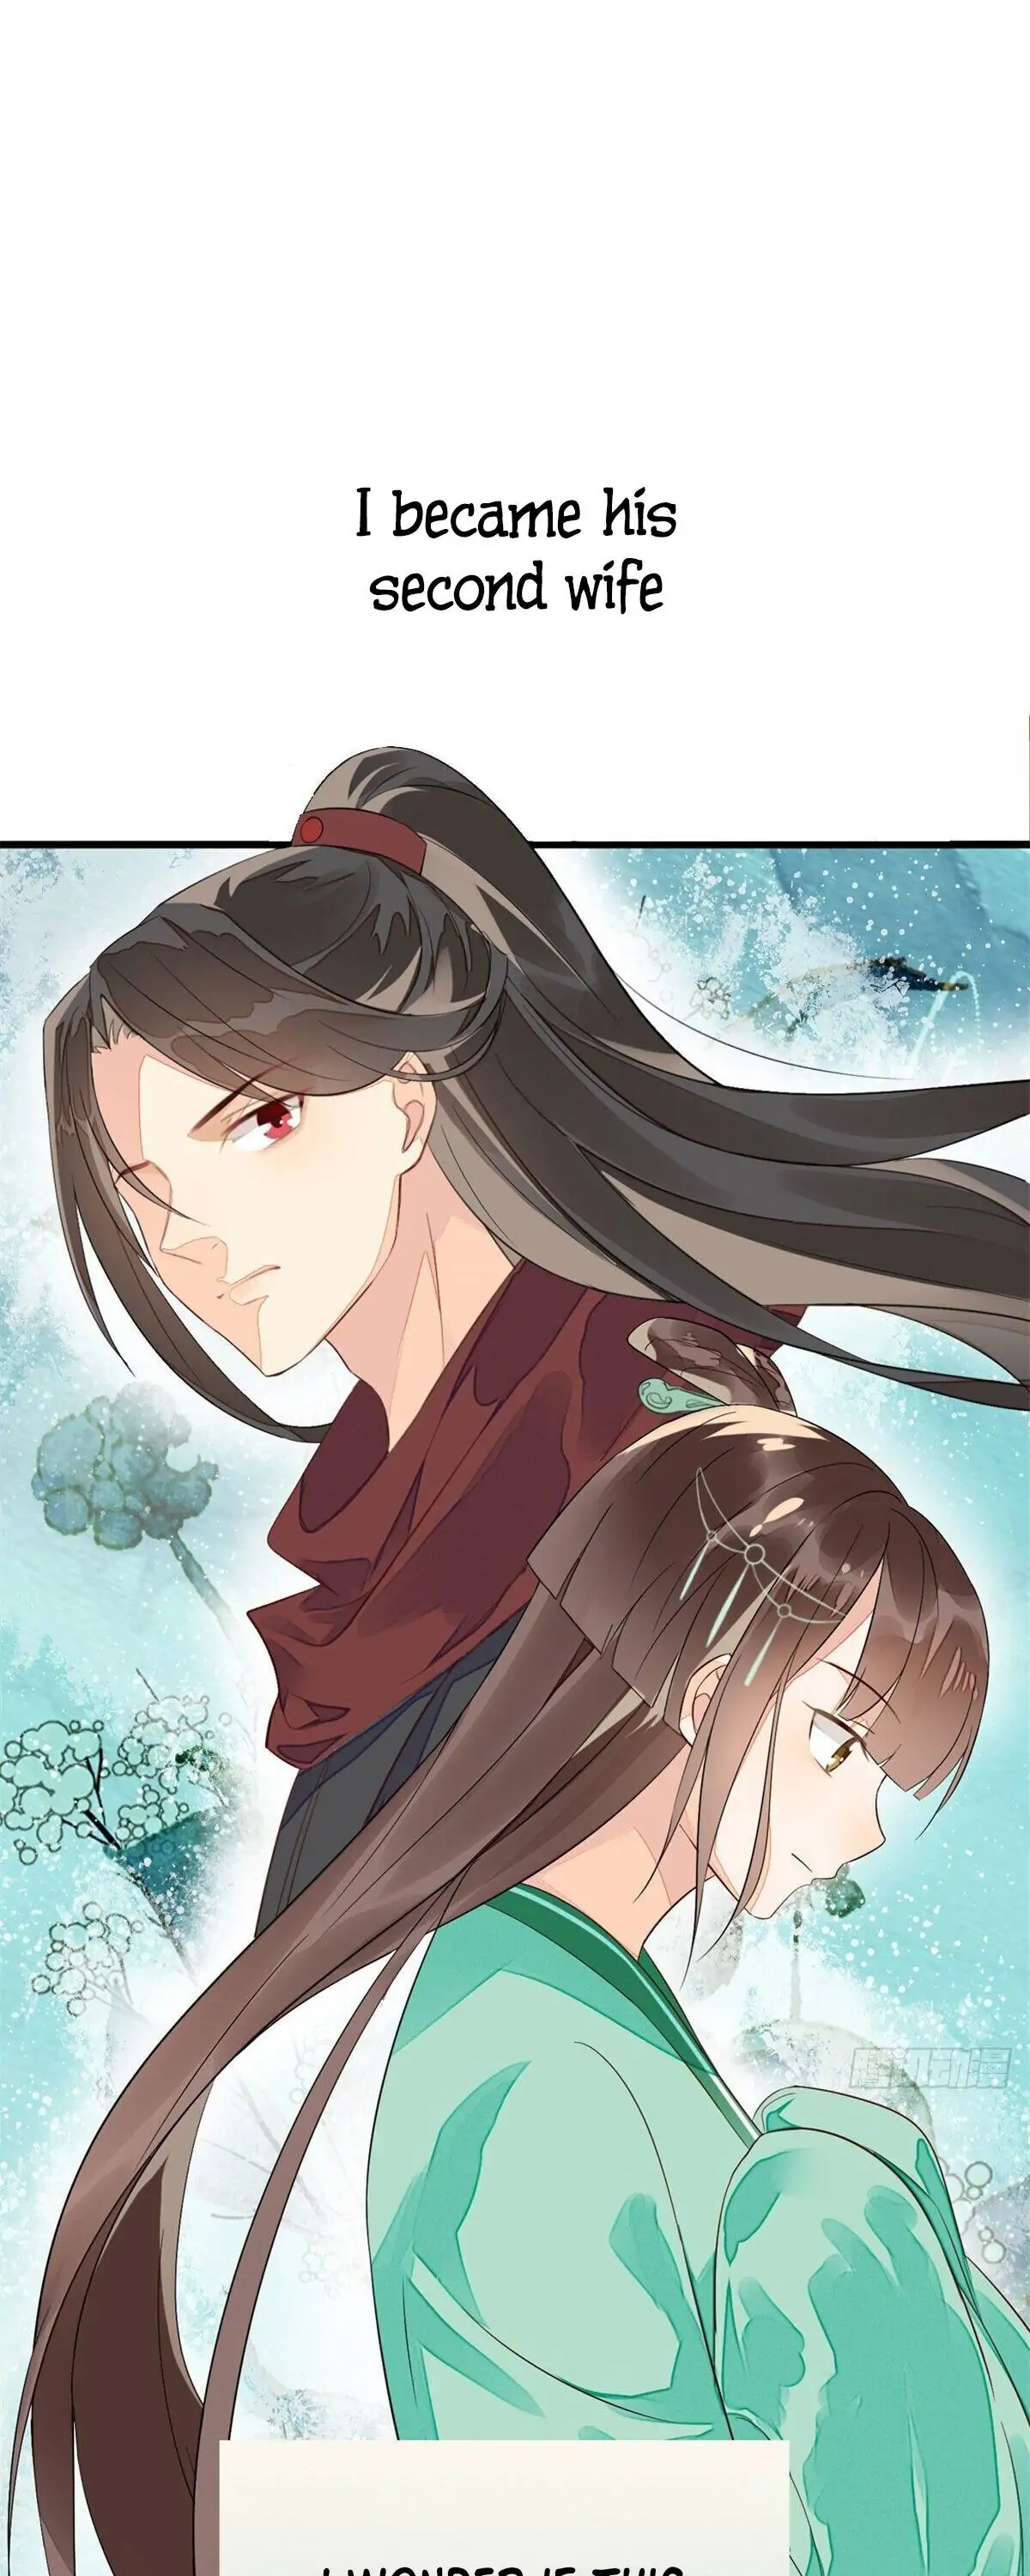 A Concubine’s Daughter and Her Tactics chapter 0